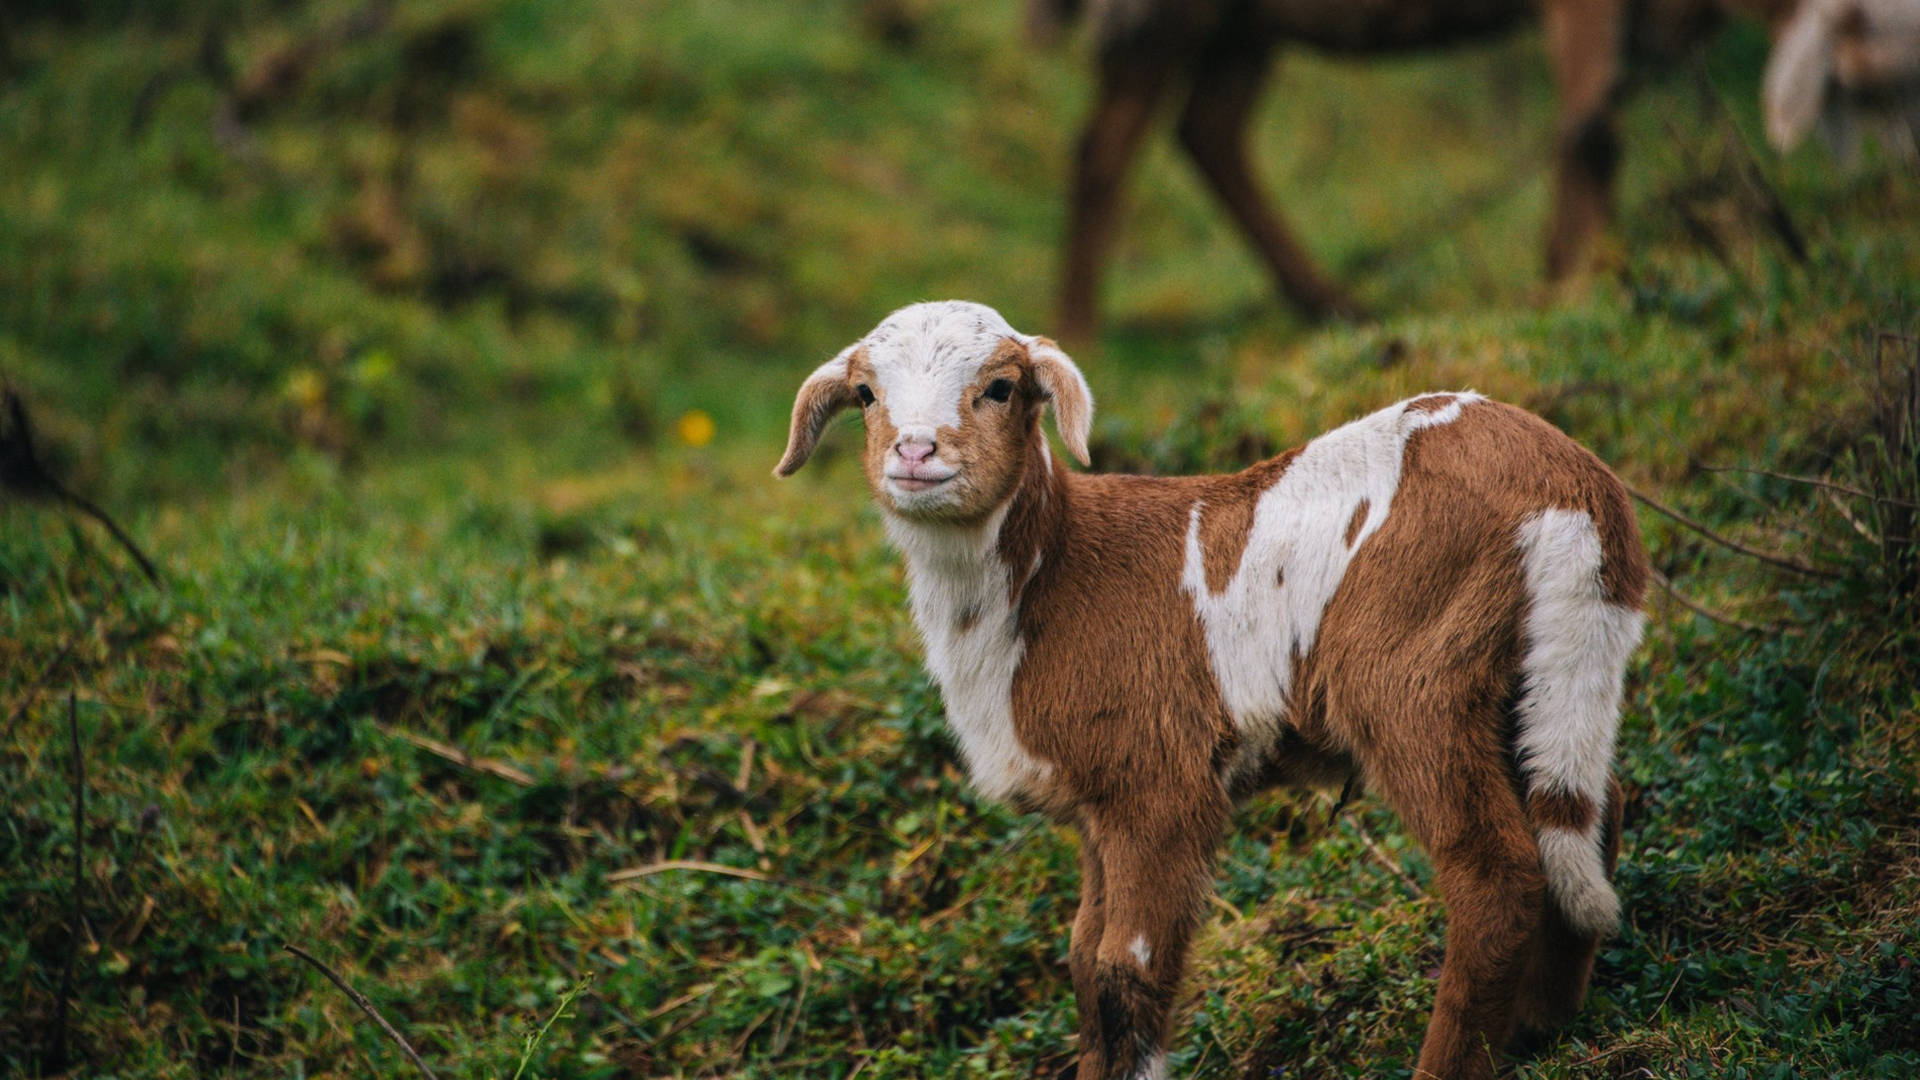 Baby Goat Standing On Mossy Field Wallpaper